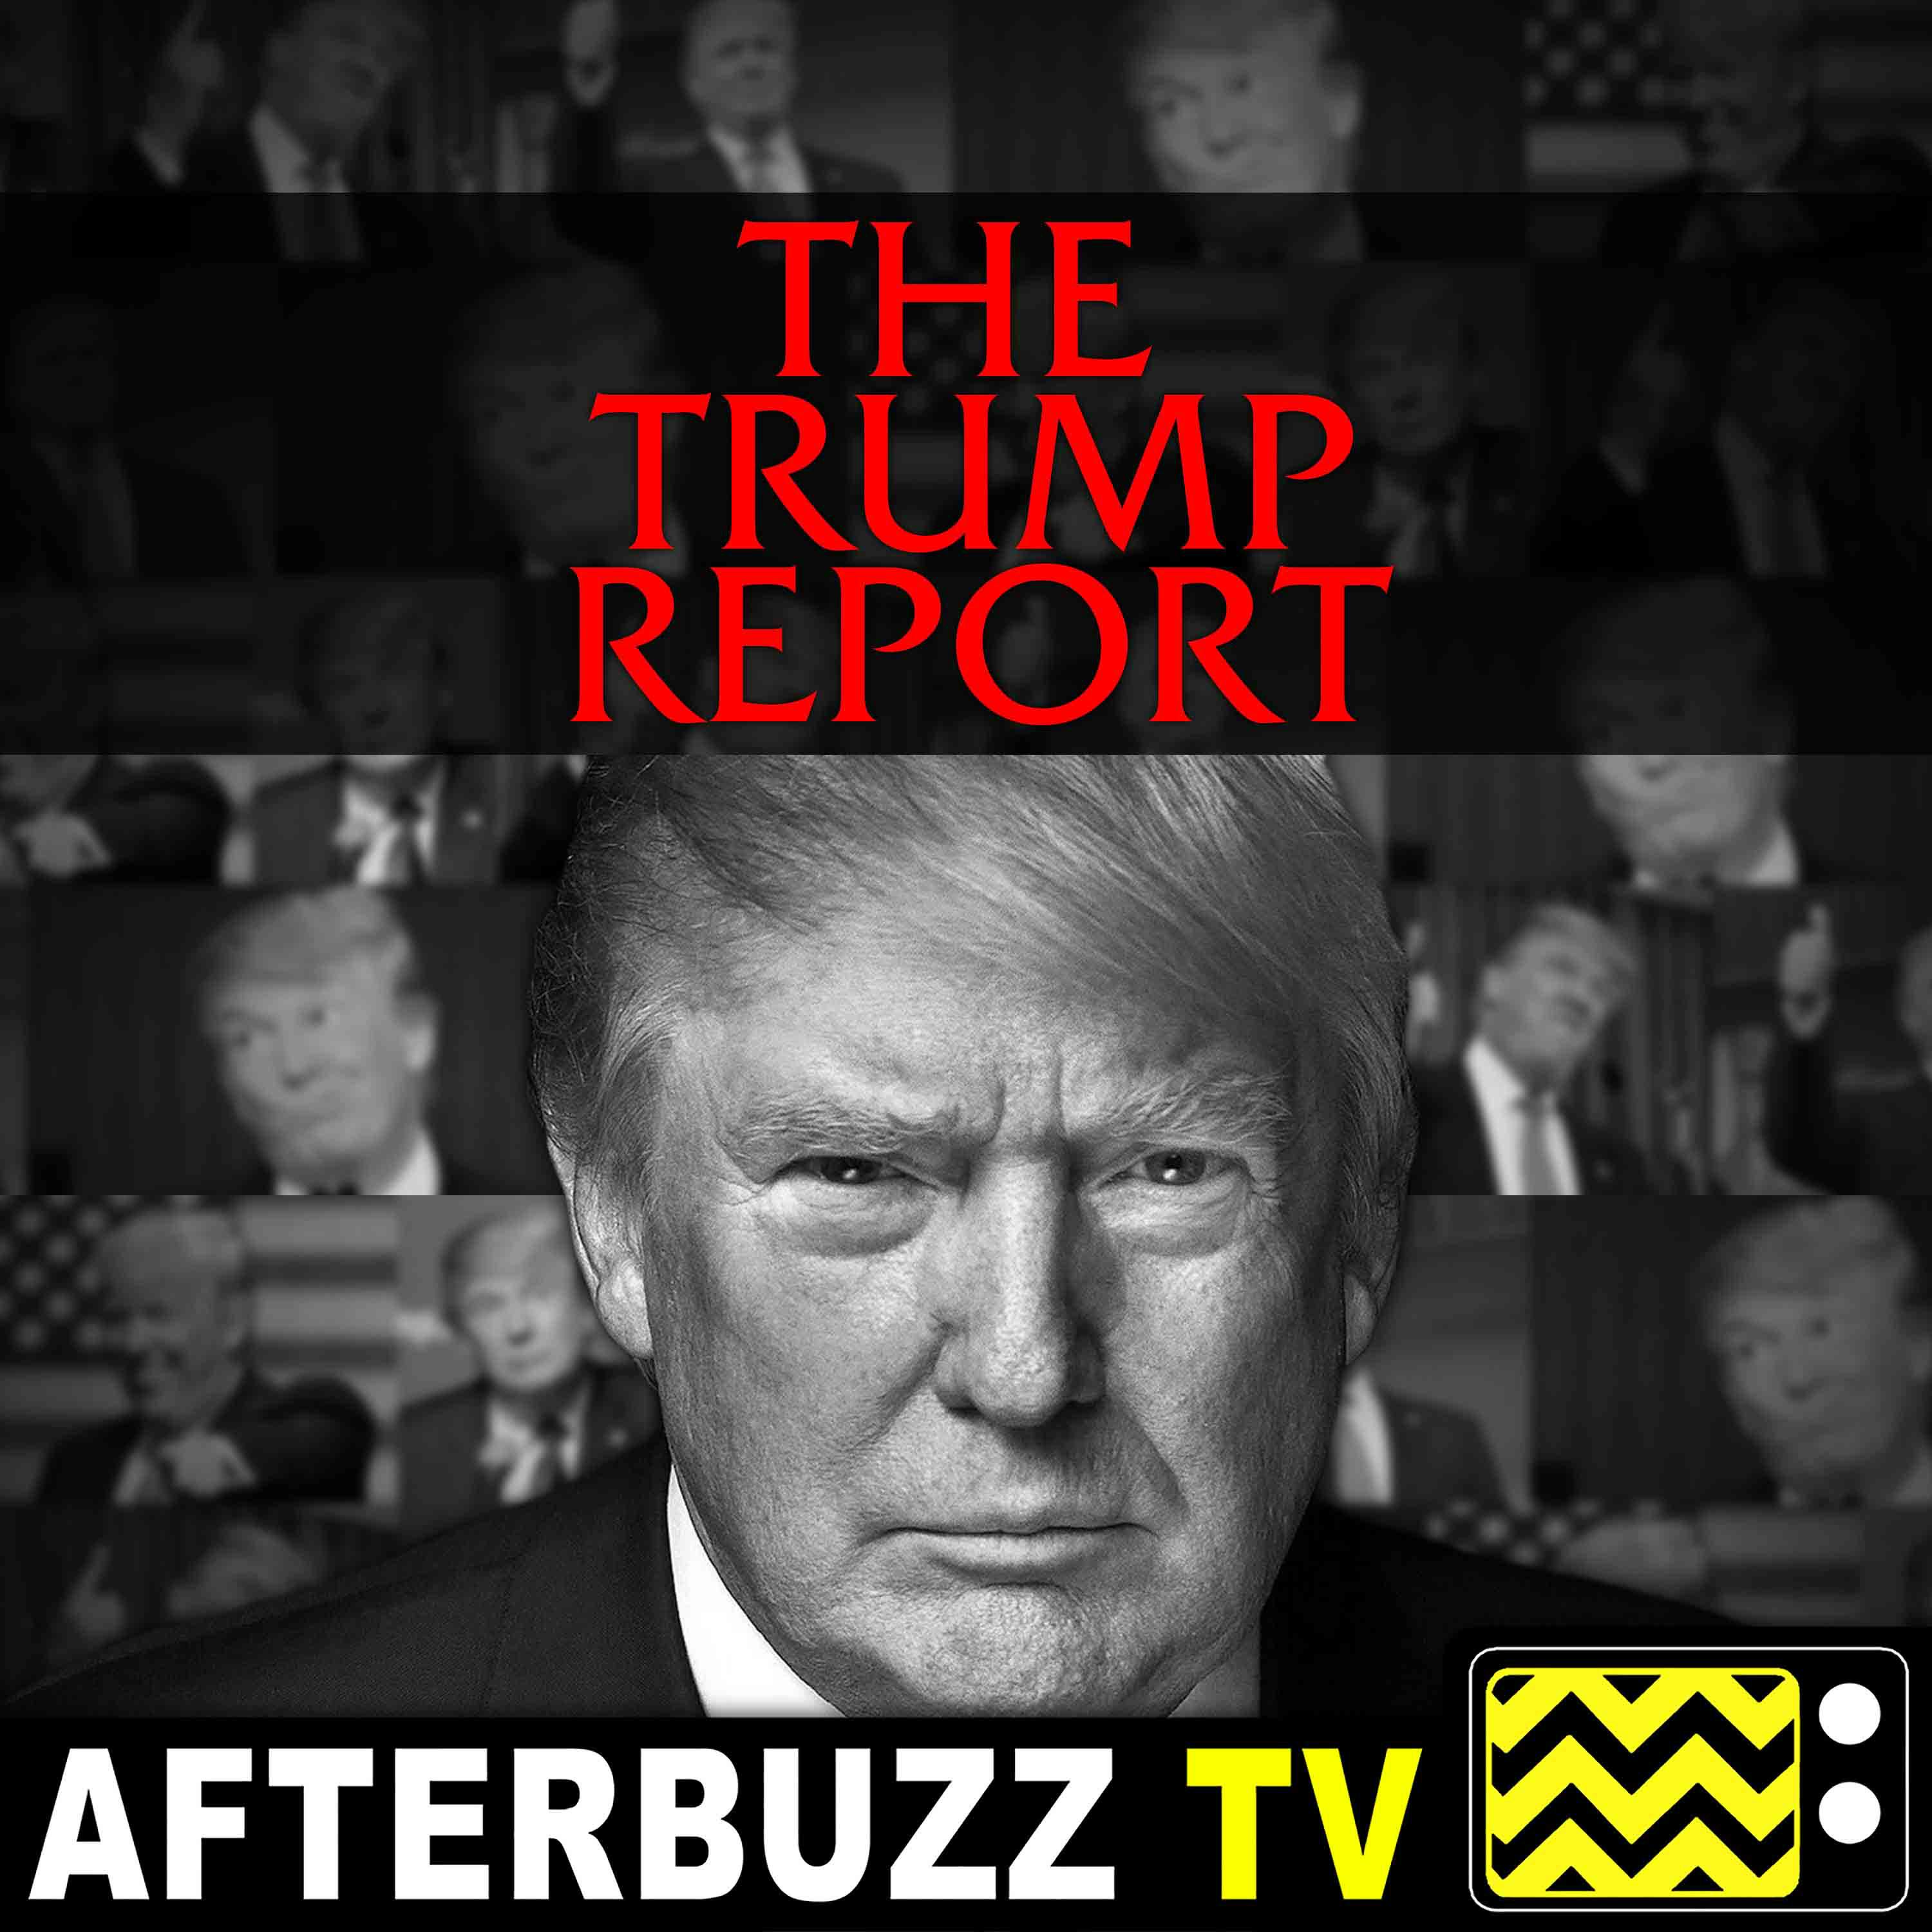 A lot of people agree with me - Trump Report